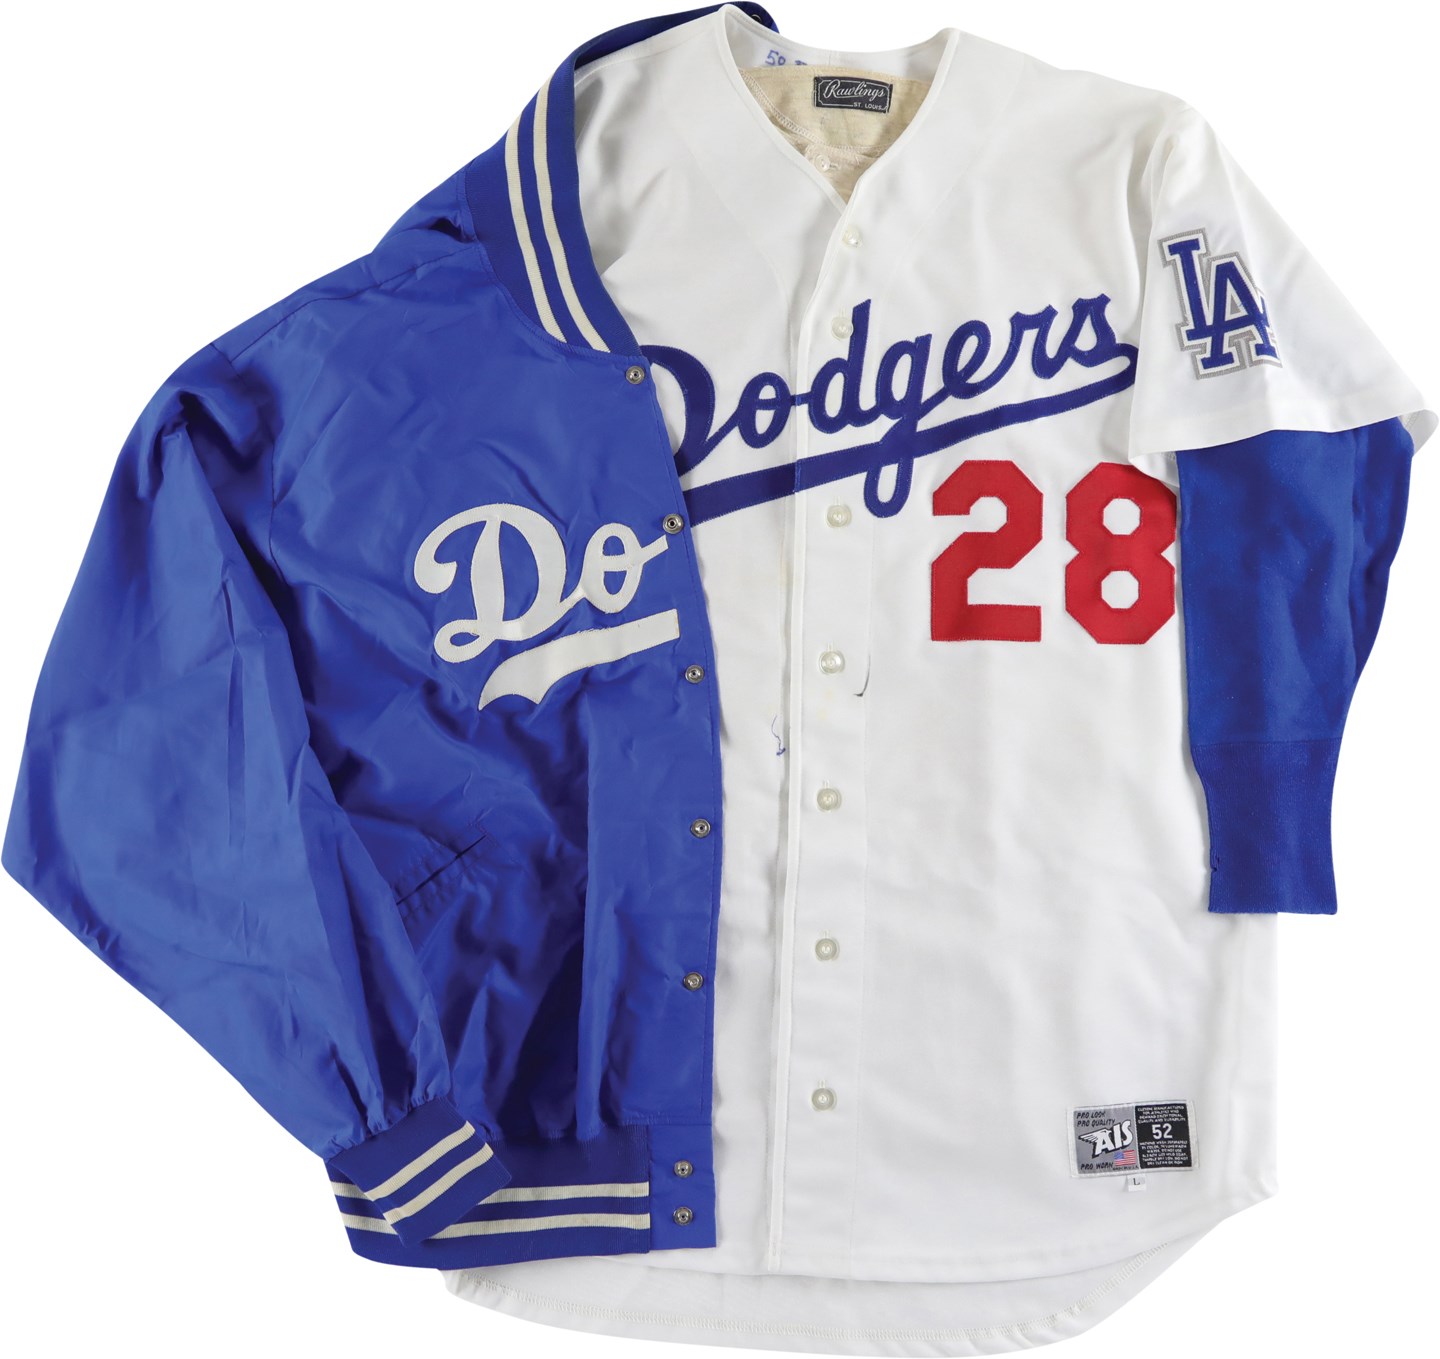 - Circa 1985 Preacher Roe Old Timers or Spring Training Jersey, Jacket, and Undershirt